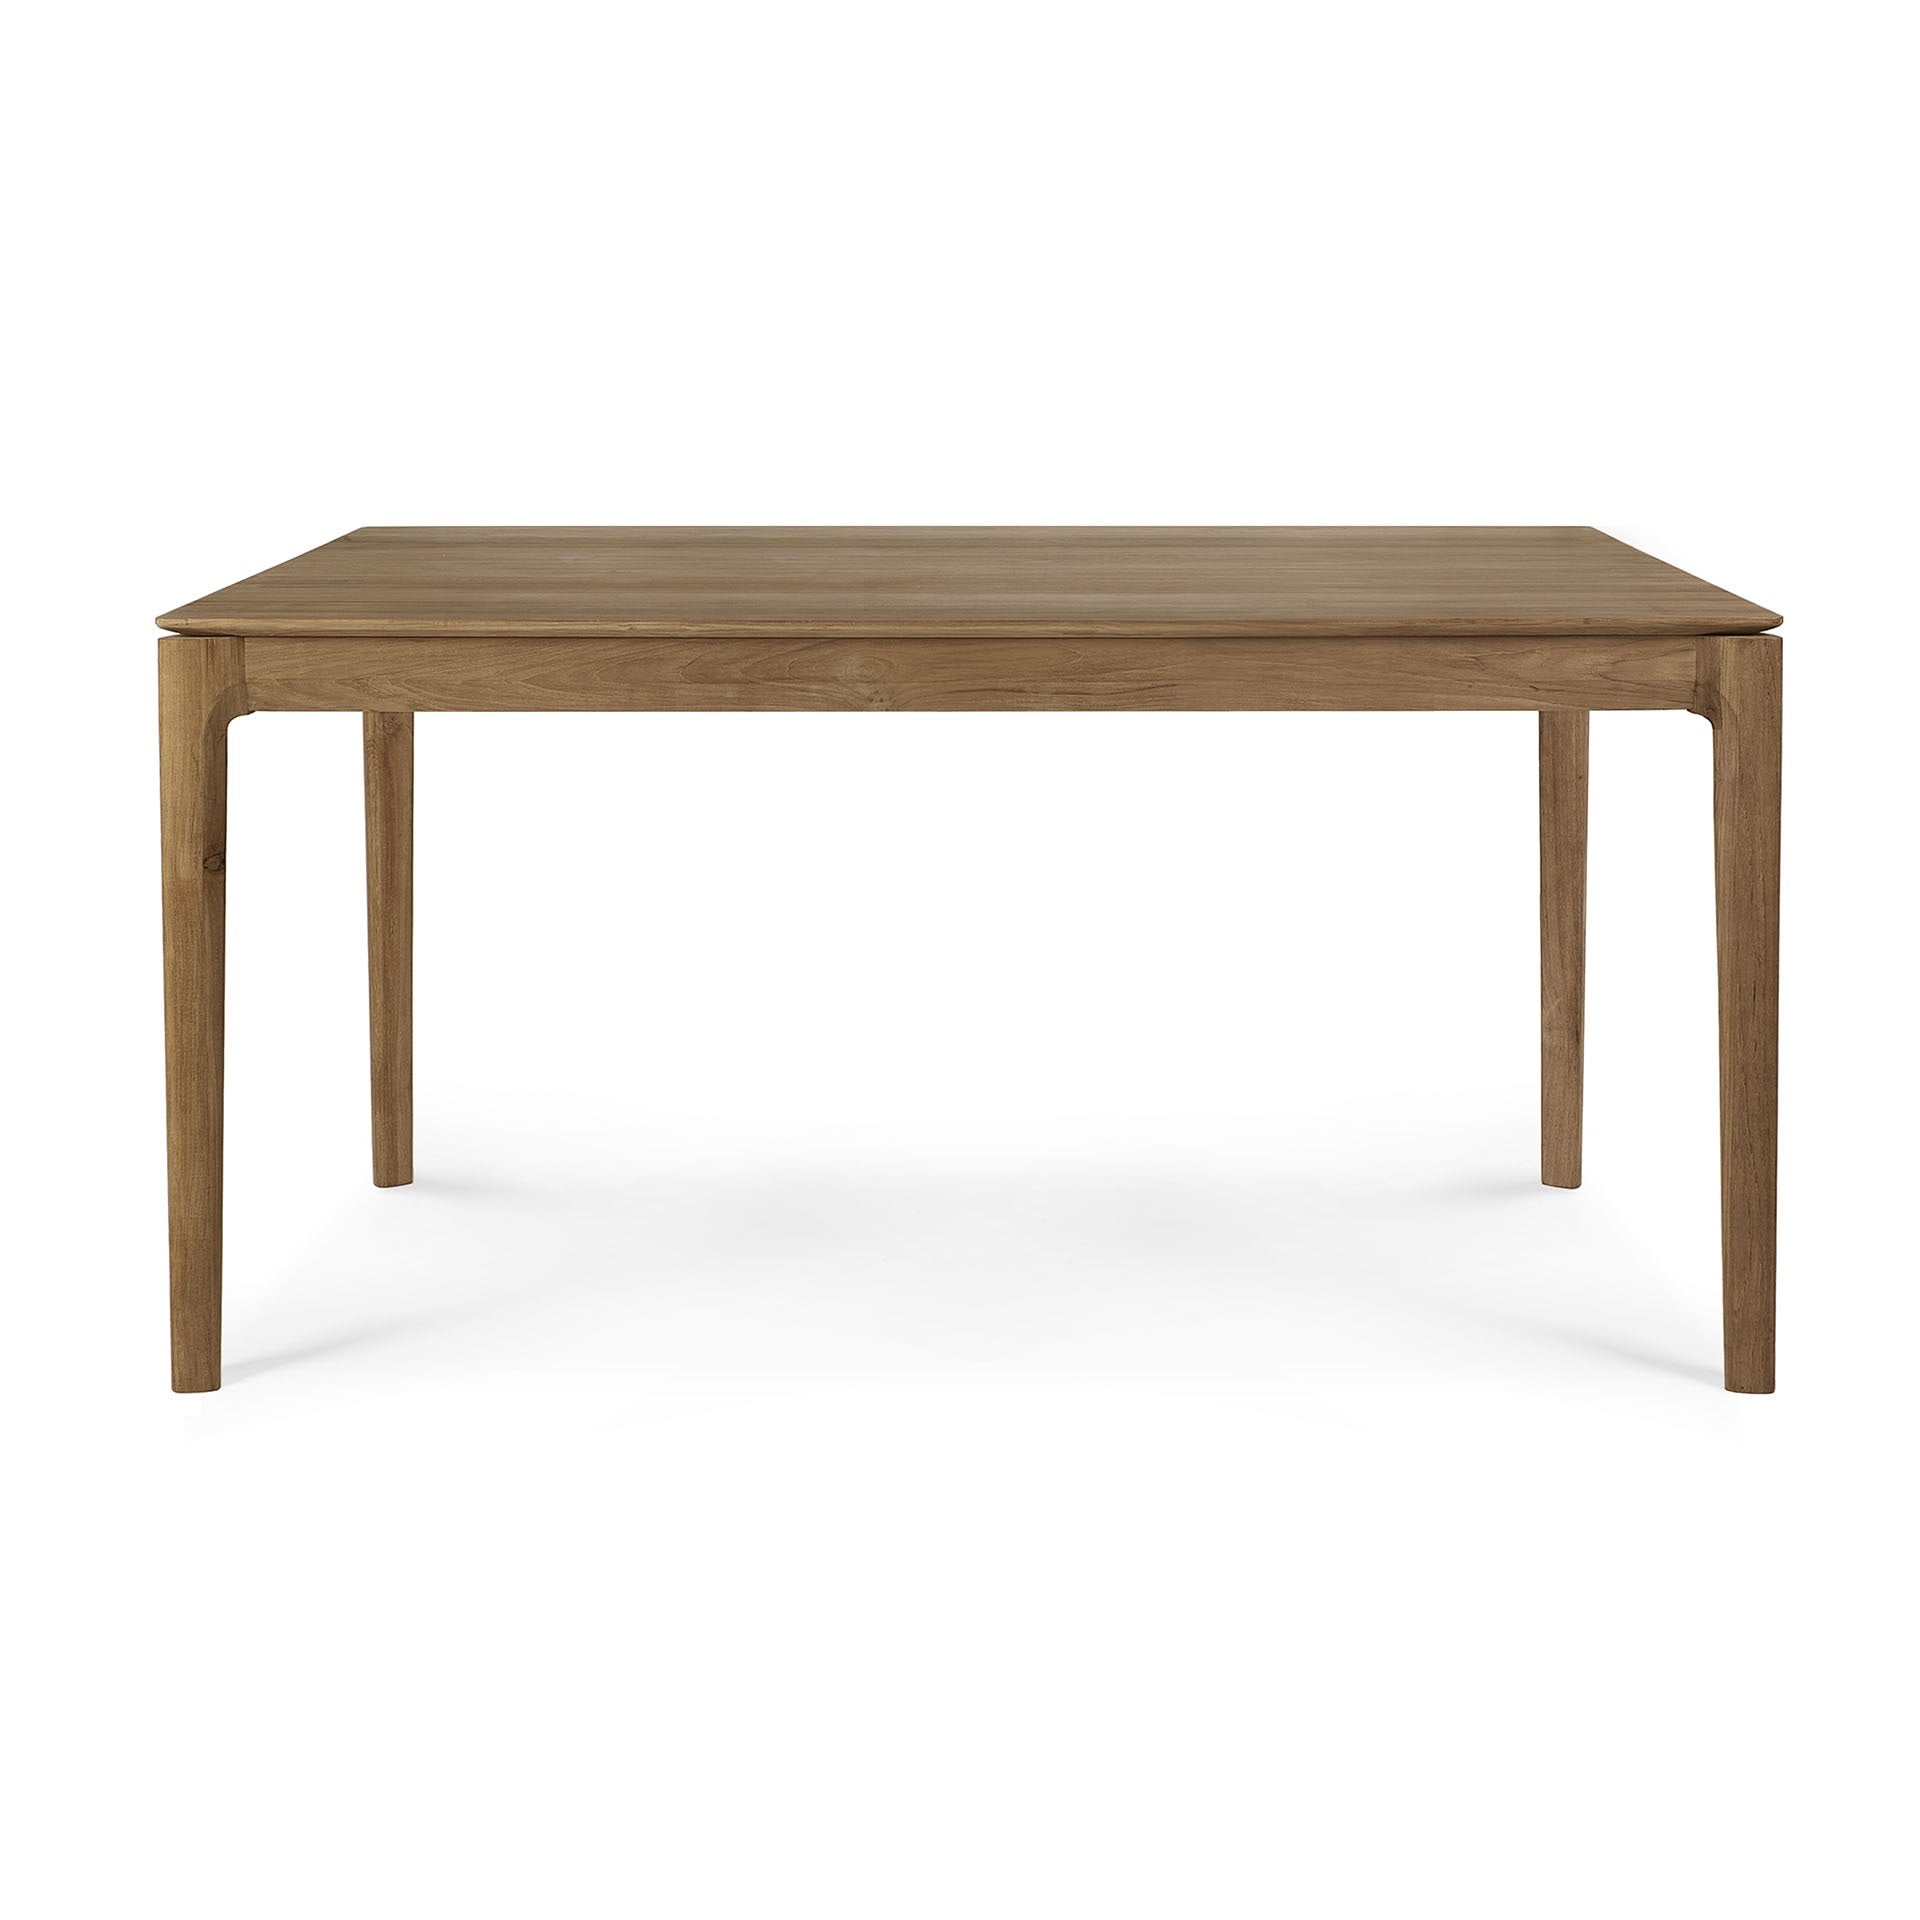 Ethnicraft Teak Bok Dining Table is available from Make Your House A Home, Bendigo, Victoria, Australia